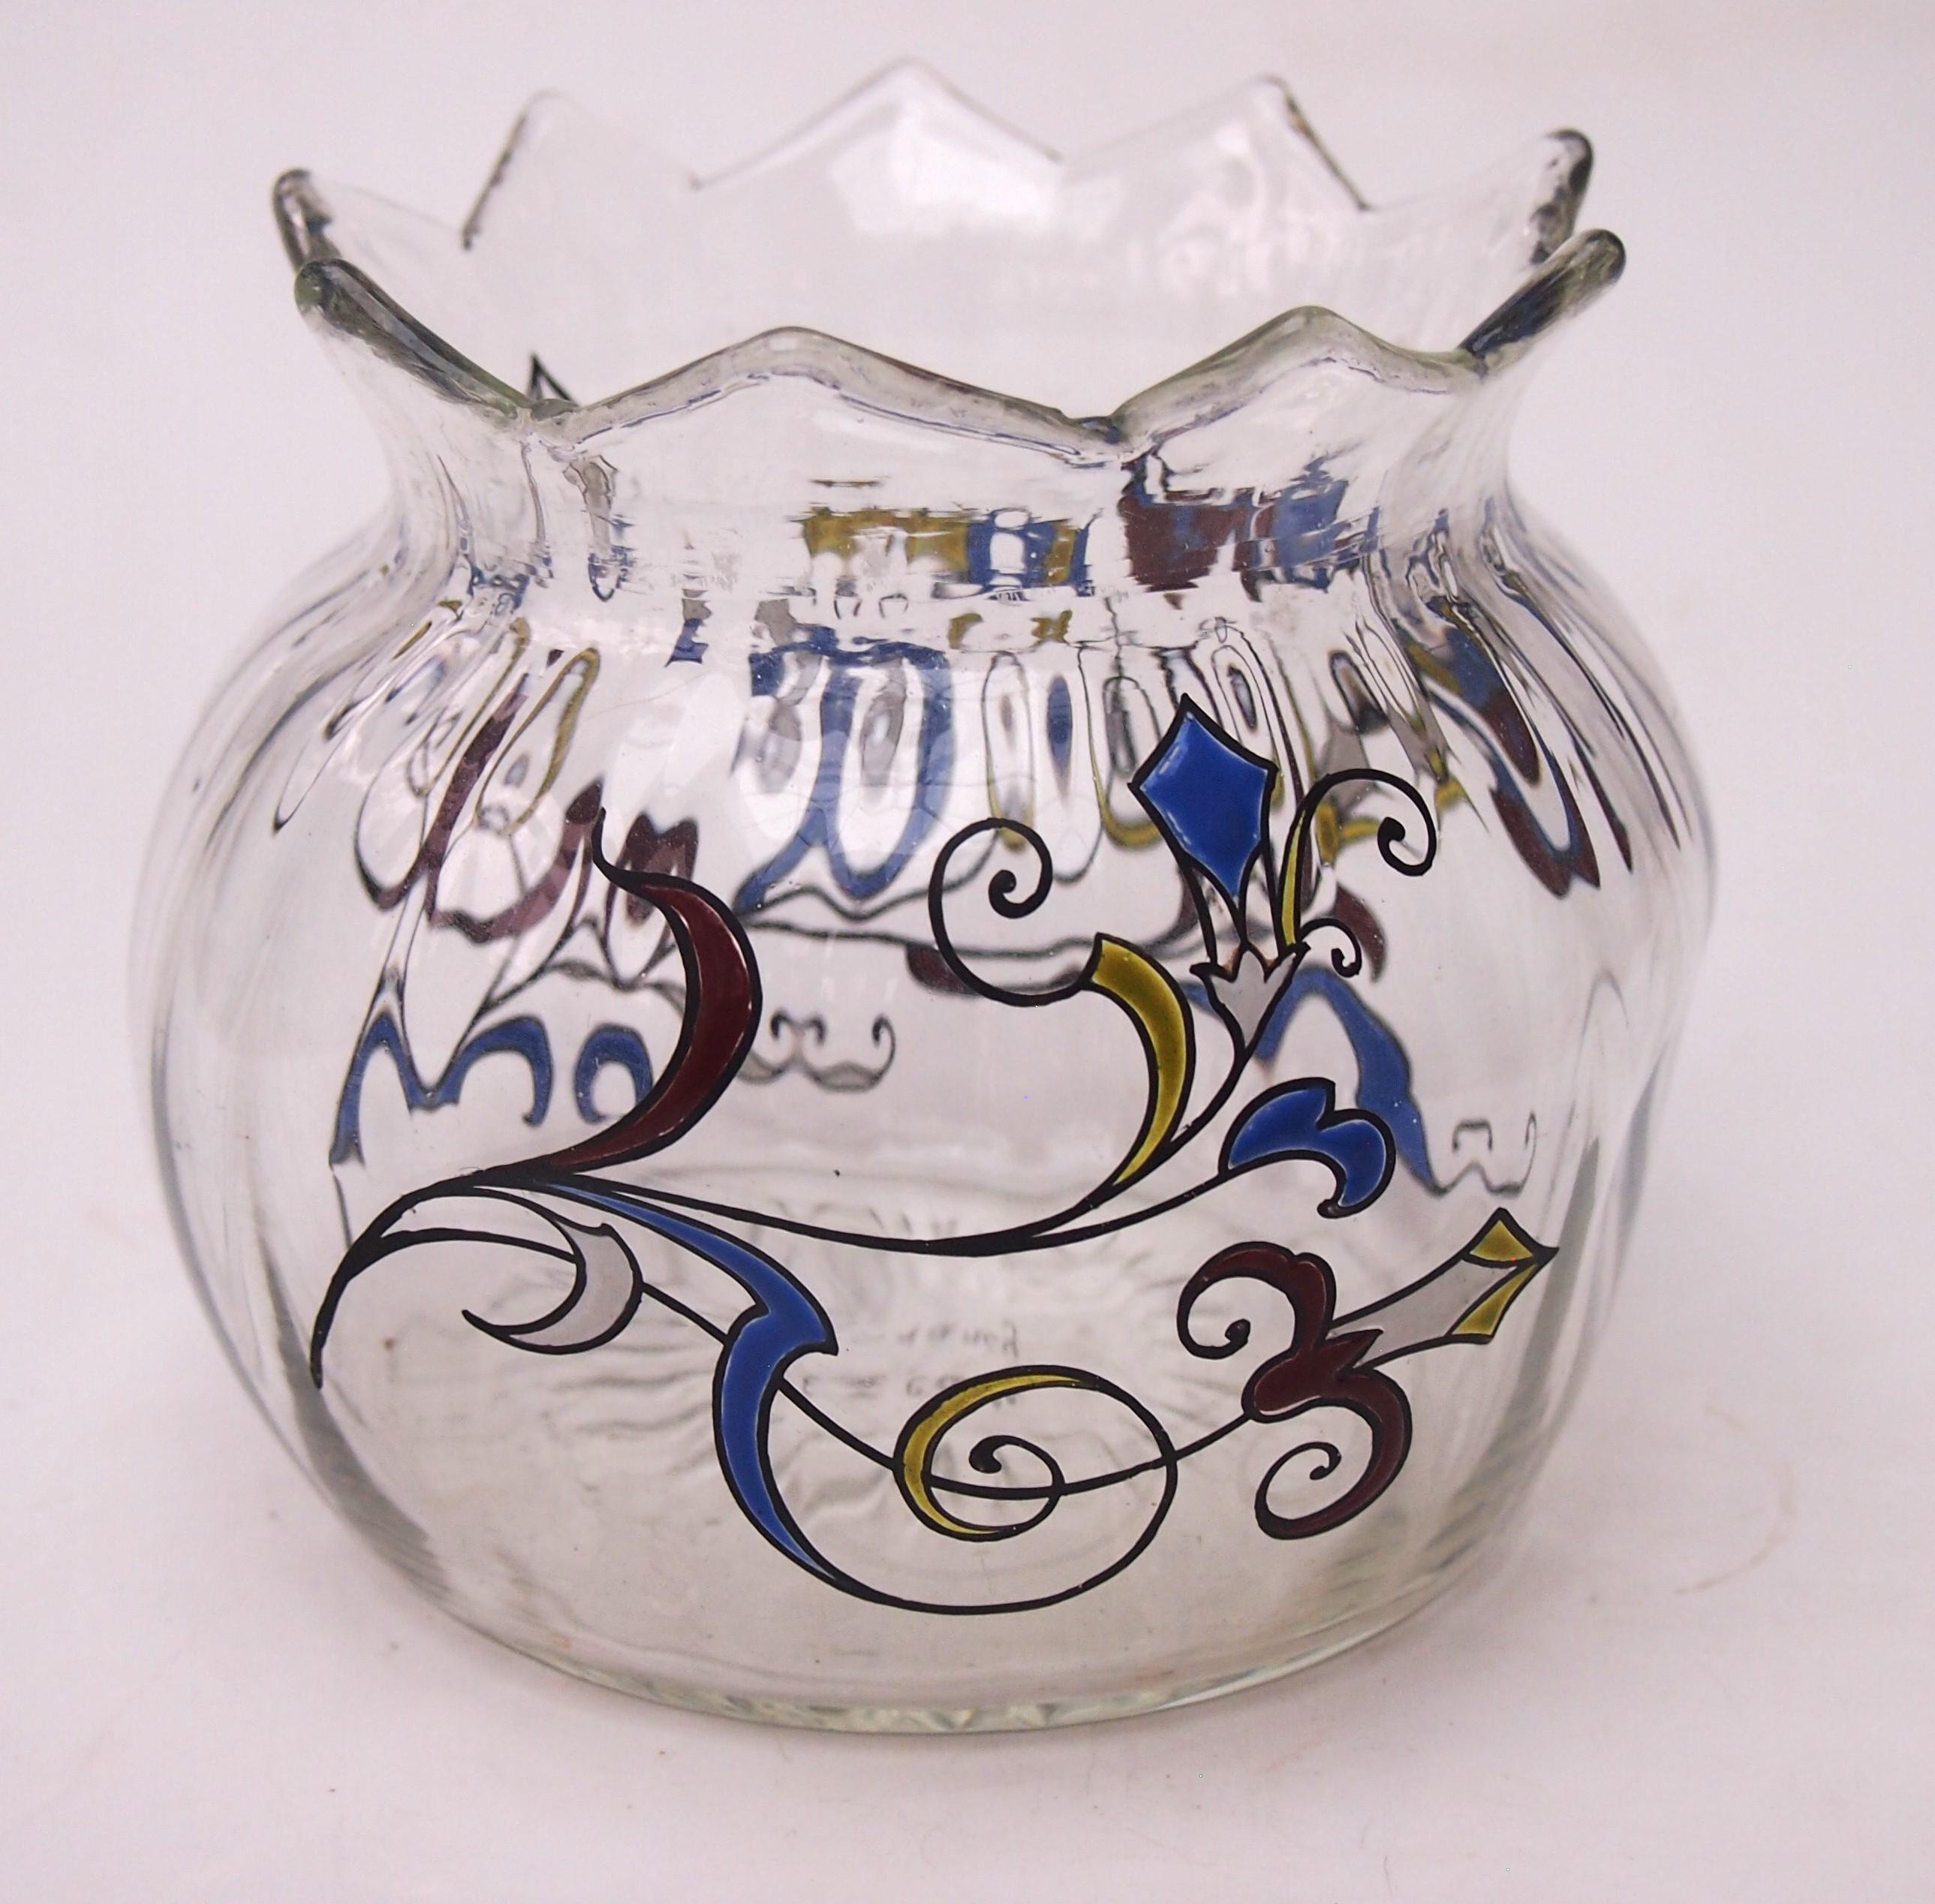 French Early Art Nouveau Emile Galle First Period Enamel Vase, circa 1890 In Good Condition For Sale In Worcester Park, GB